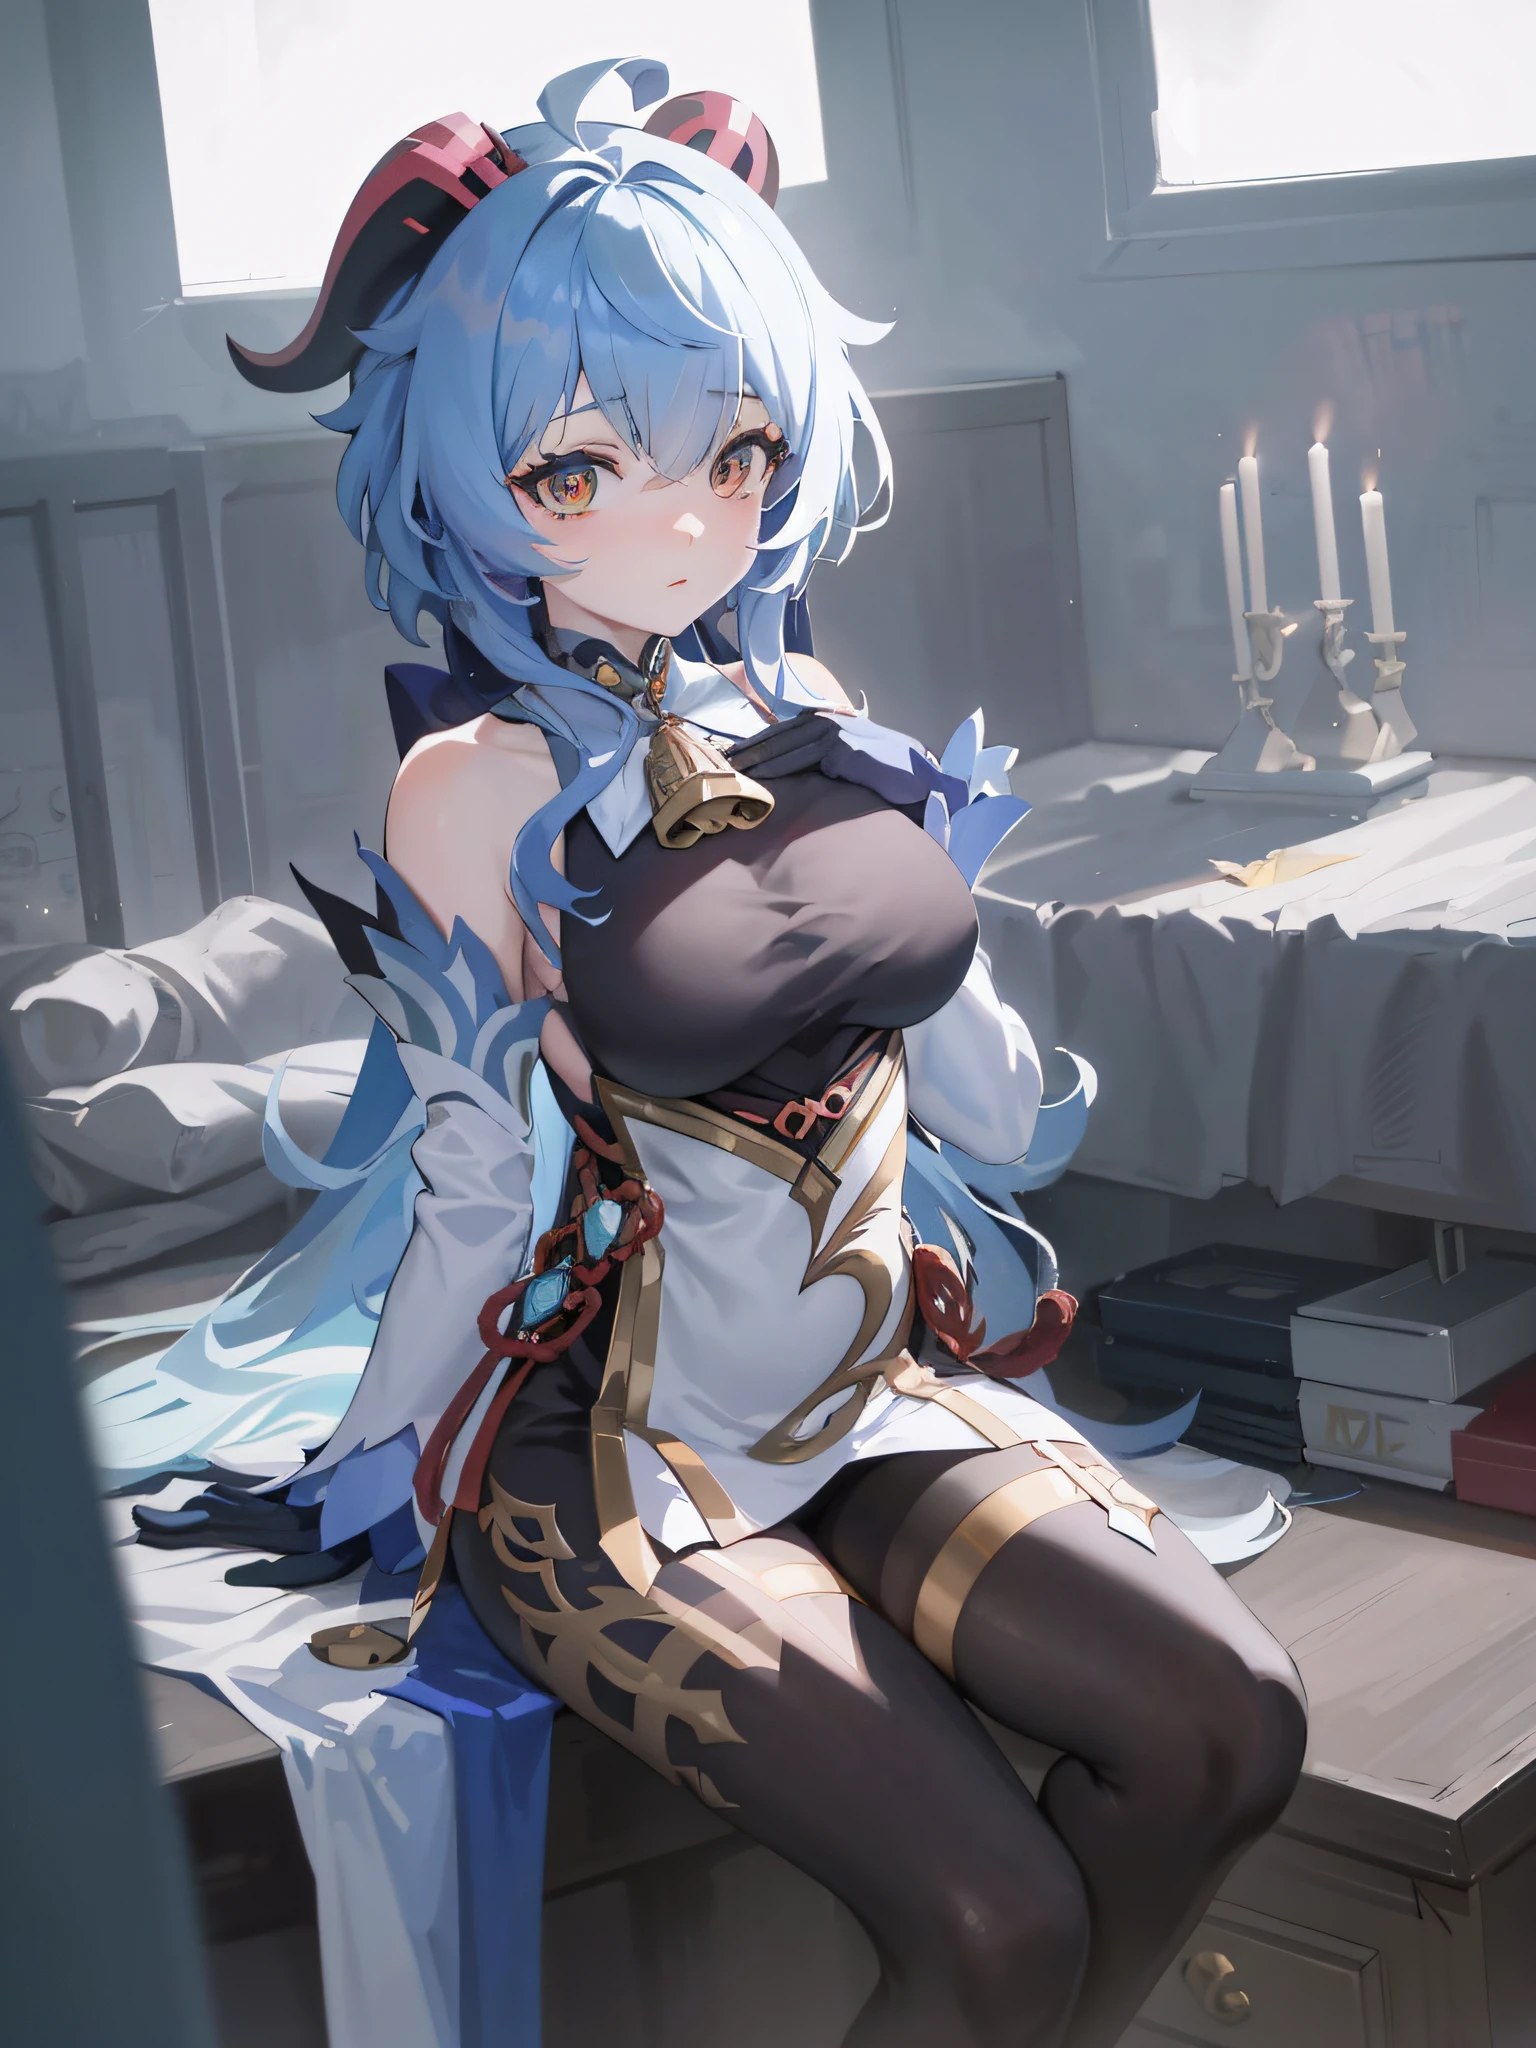 Anime girl sitting on table，There is a cat on his lap, Ayaka Genshin impact, Genshin, Keqing from Genshin Impact, Guweiz on ArtStation Pixiv, Guweiz in Pixiv ArtStation, trending on artstation pixiv, ayaka game genshin impact, Extremely detailed Artgerm, blue scales covering her chest